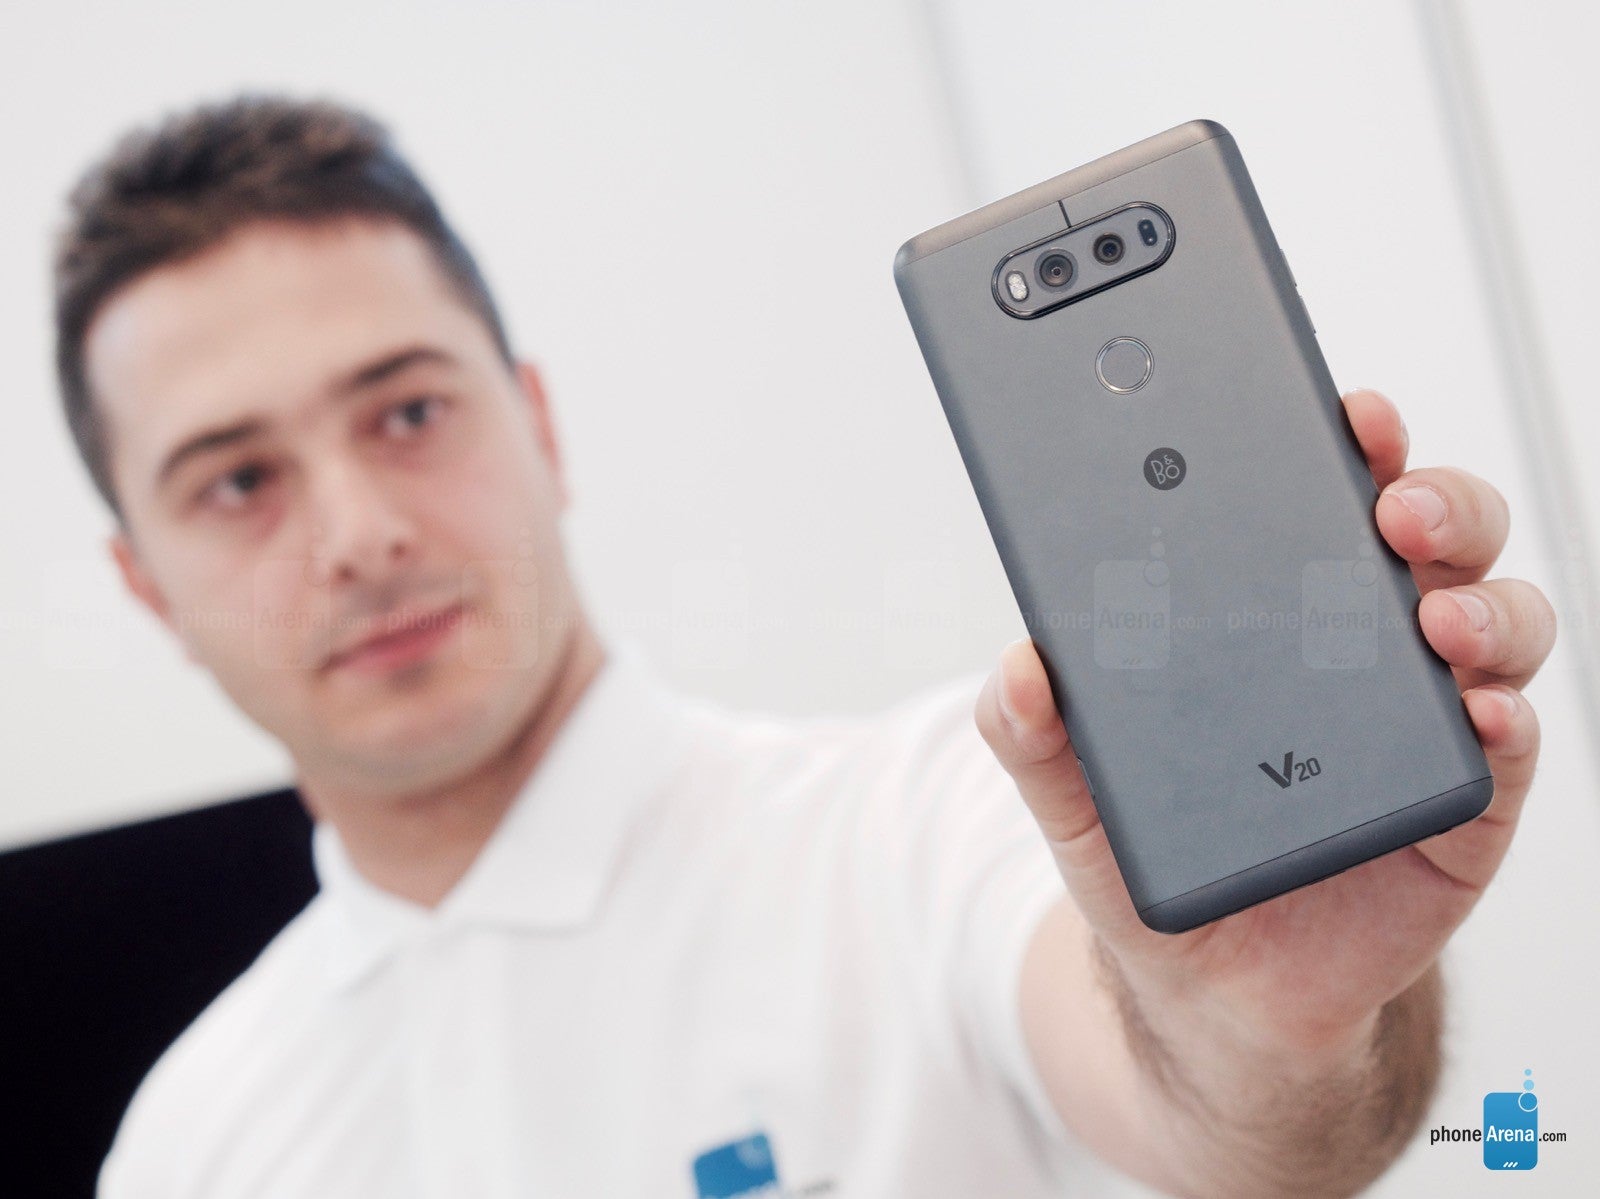 LG V20 preview: tanky phablet sports second screen and replaceable battery